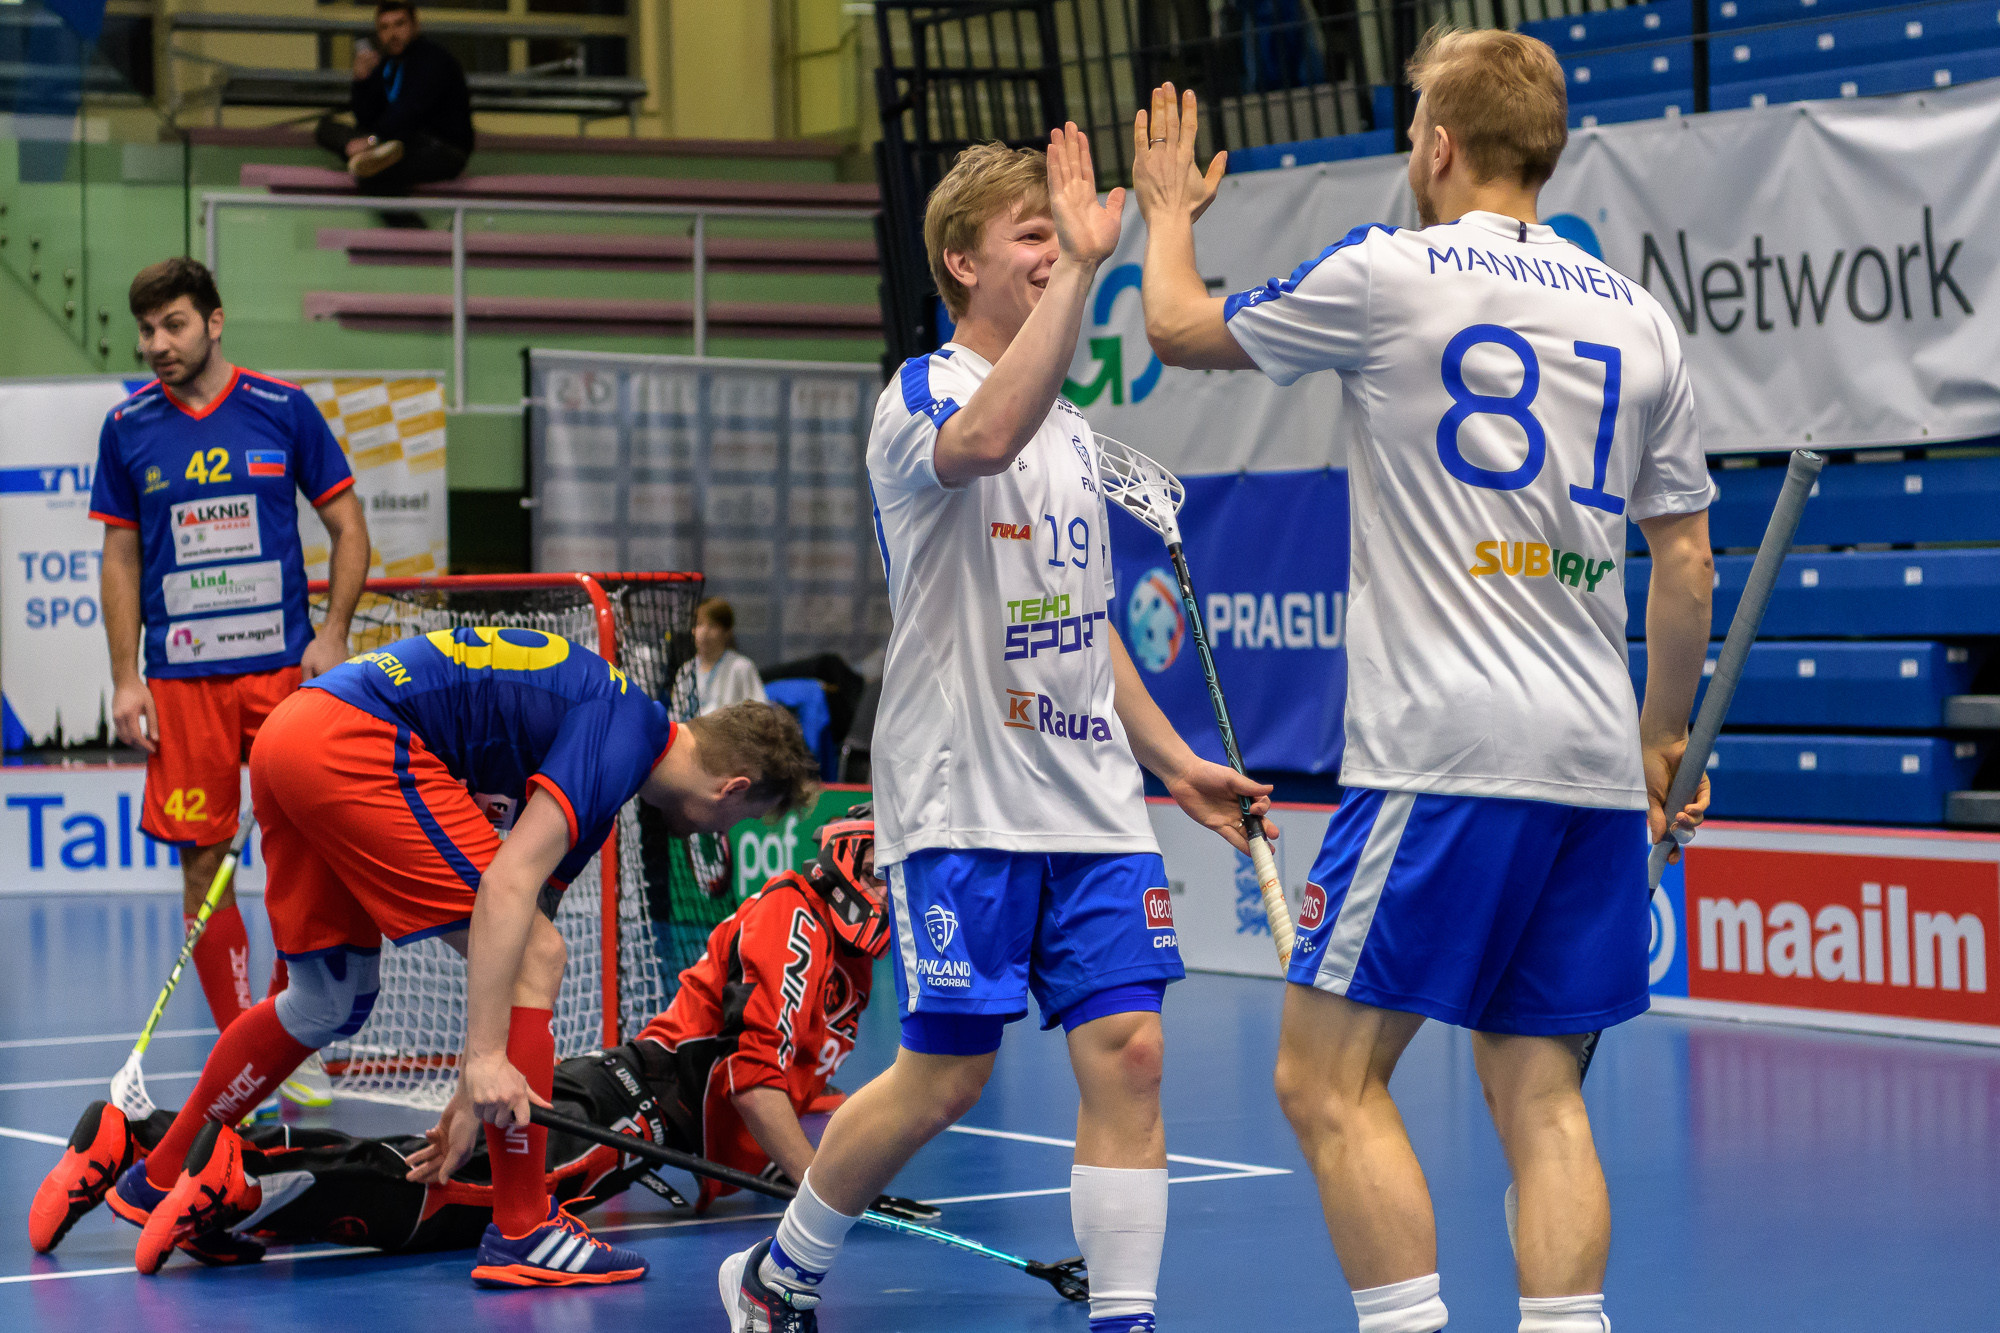 Switzerland and Finland record dominant victories at IFF European Floorball World Championship qualifiers